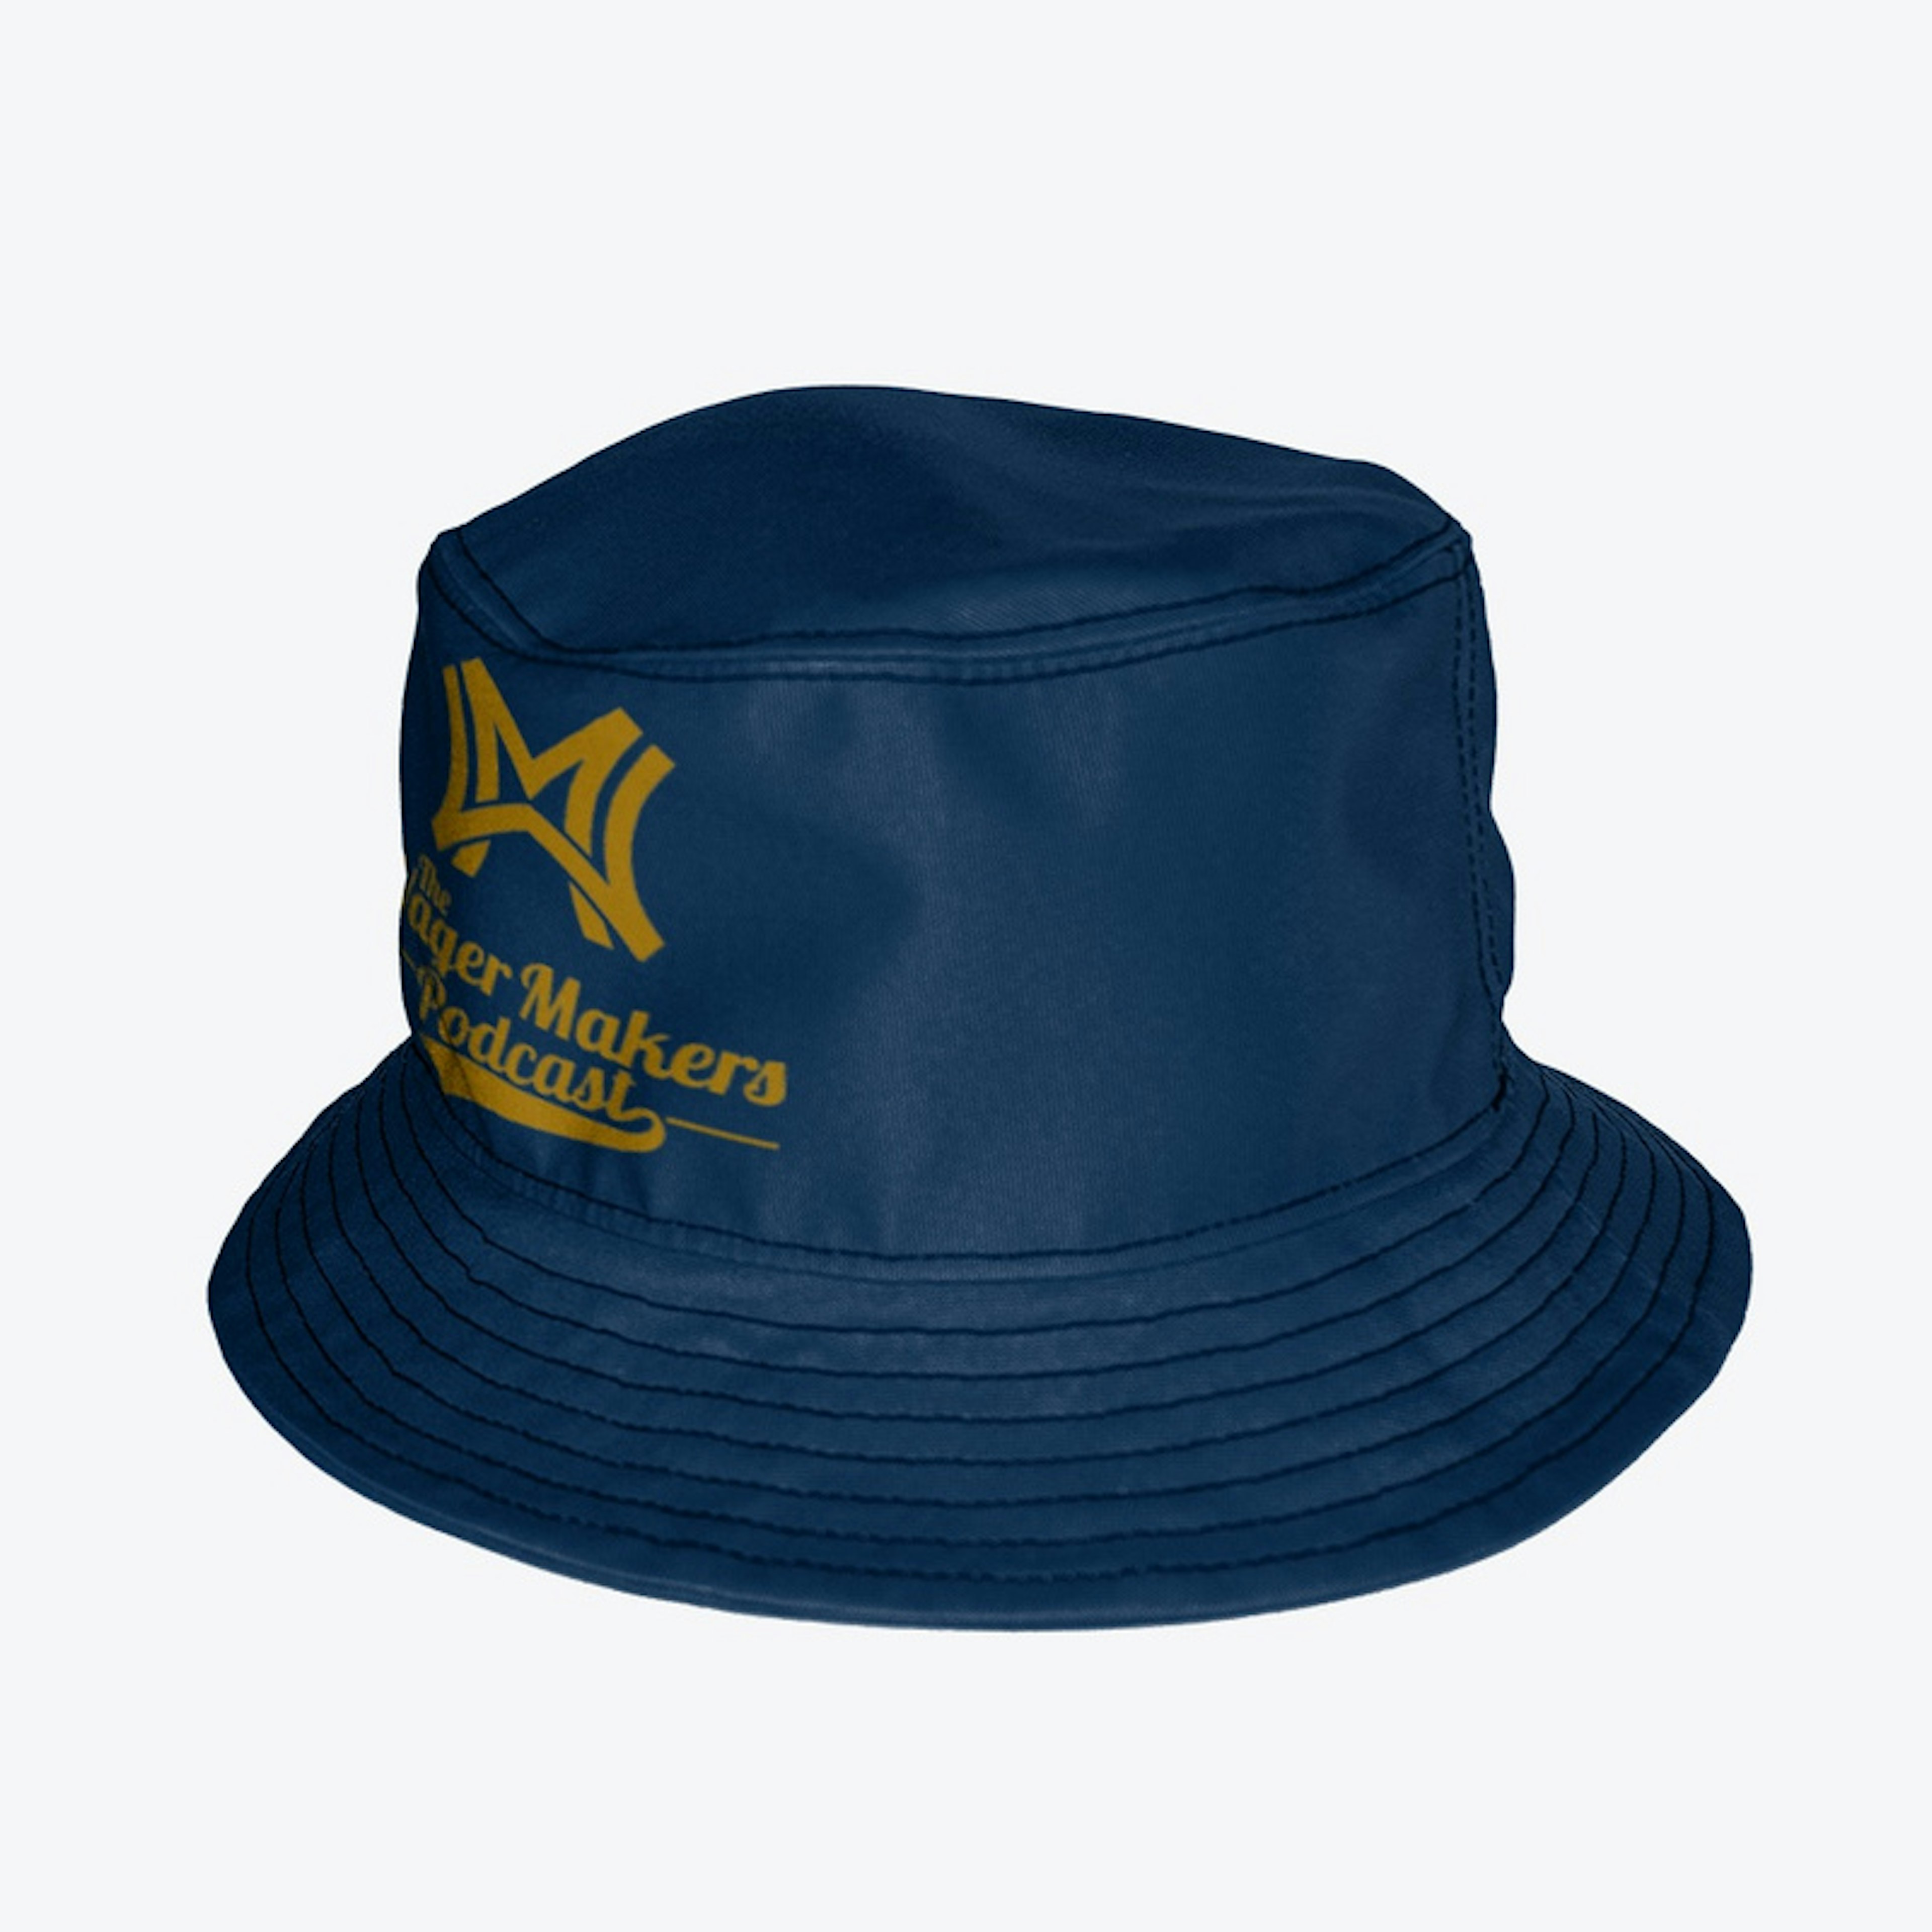 Wager Makers Bucket Hat